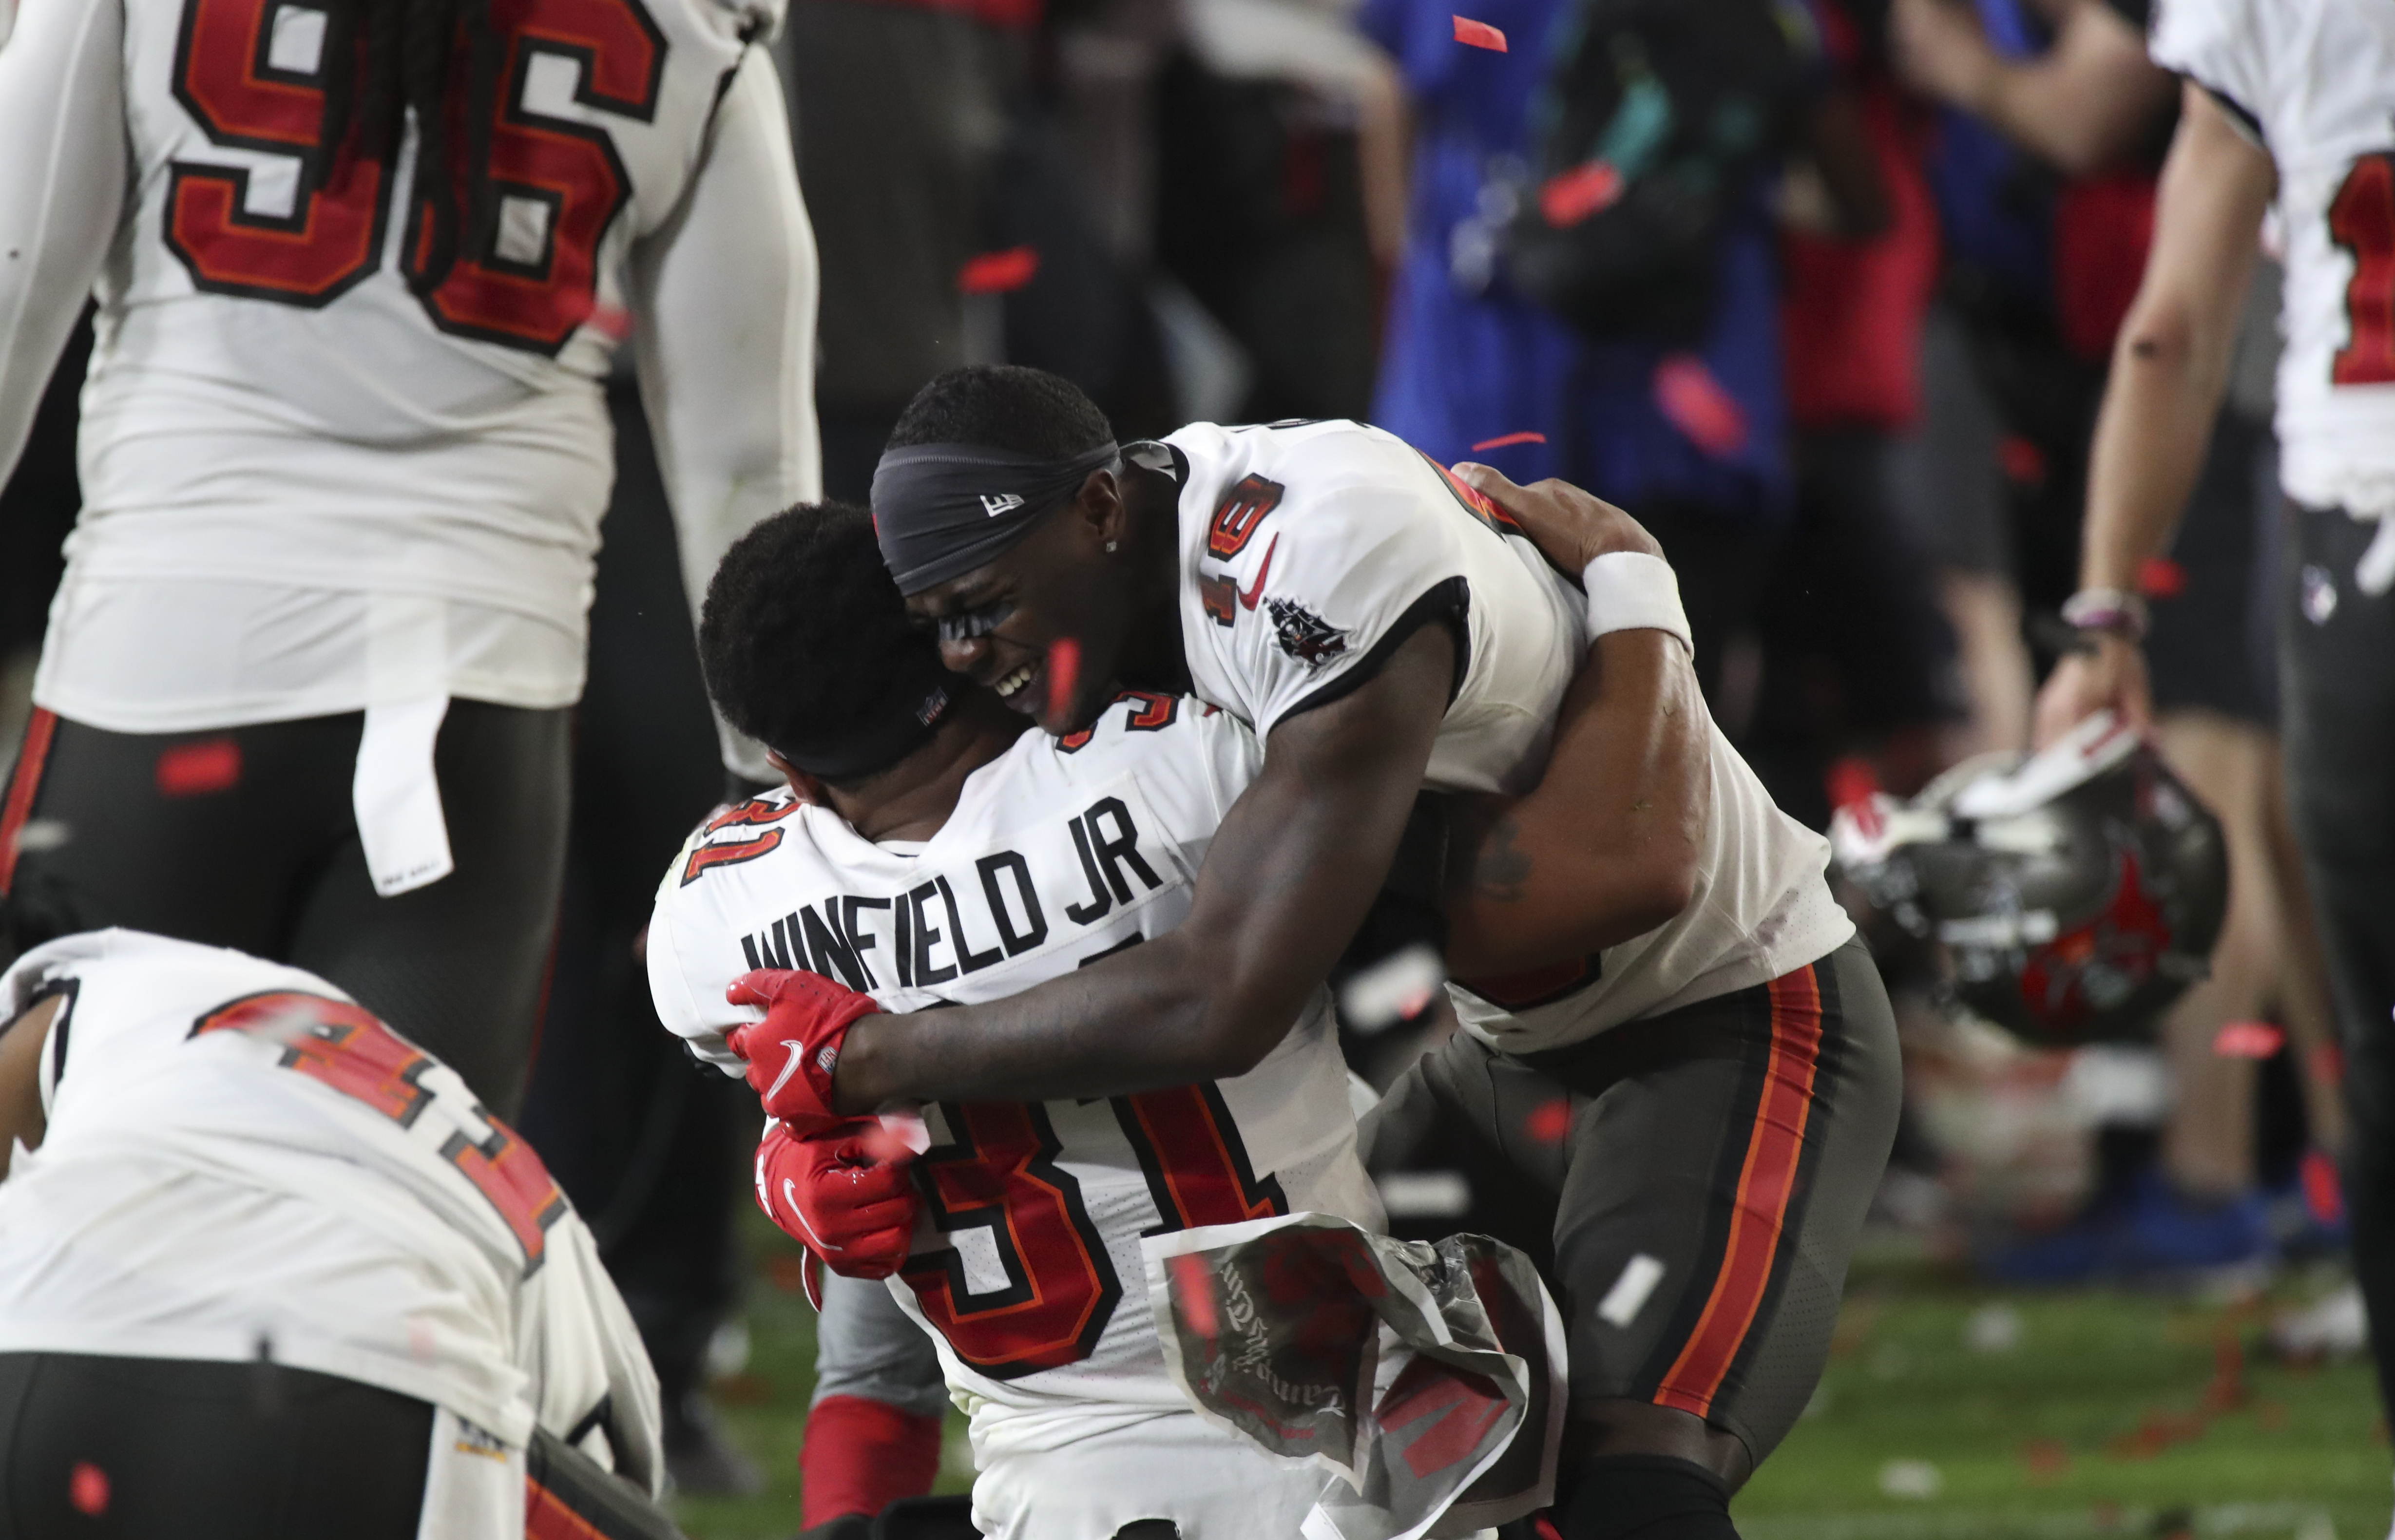 A football fairytale': Twitter reacts to Bucs' Super Bowl 55 win